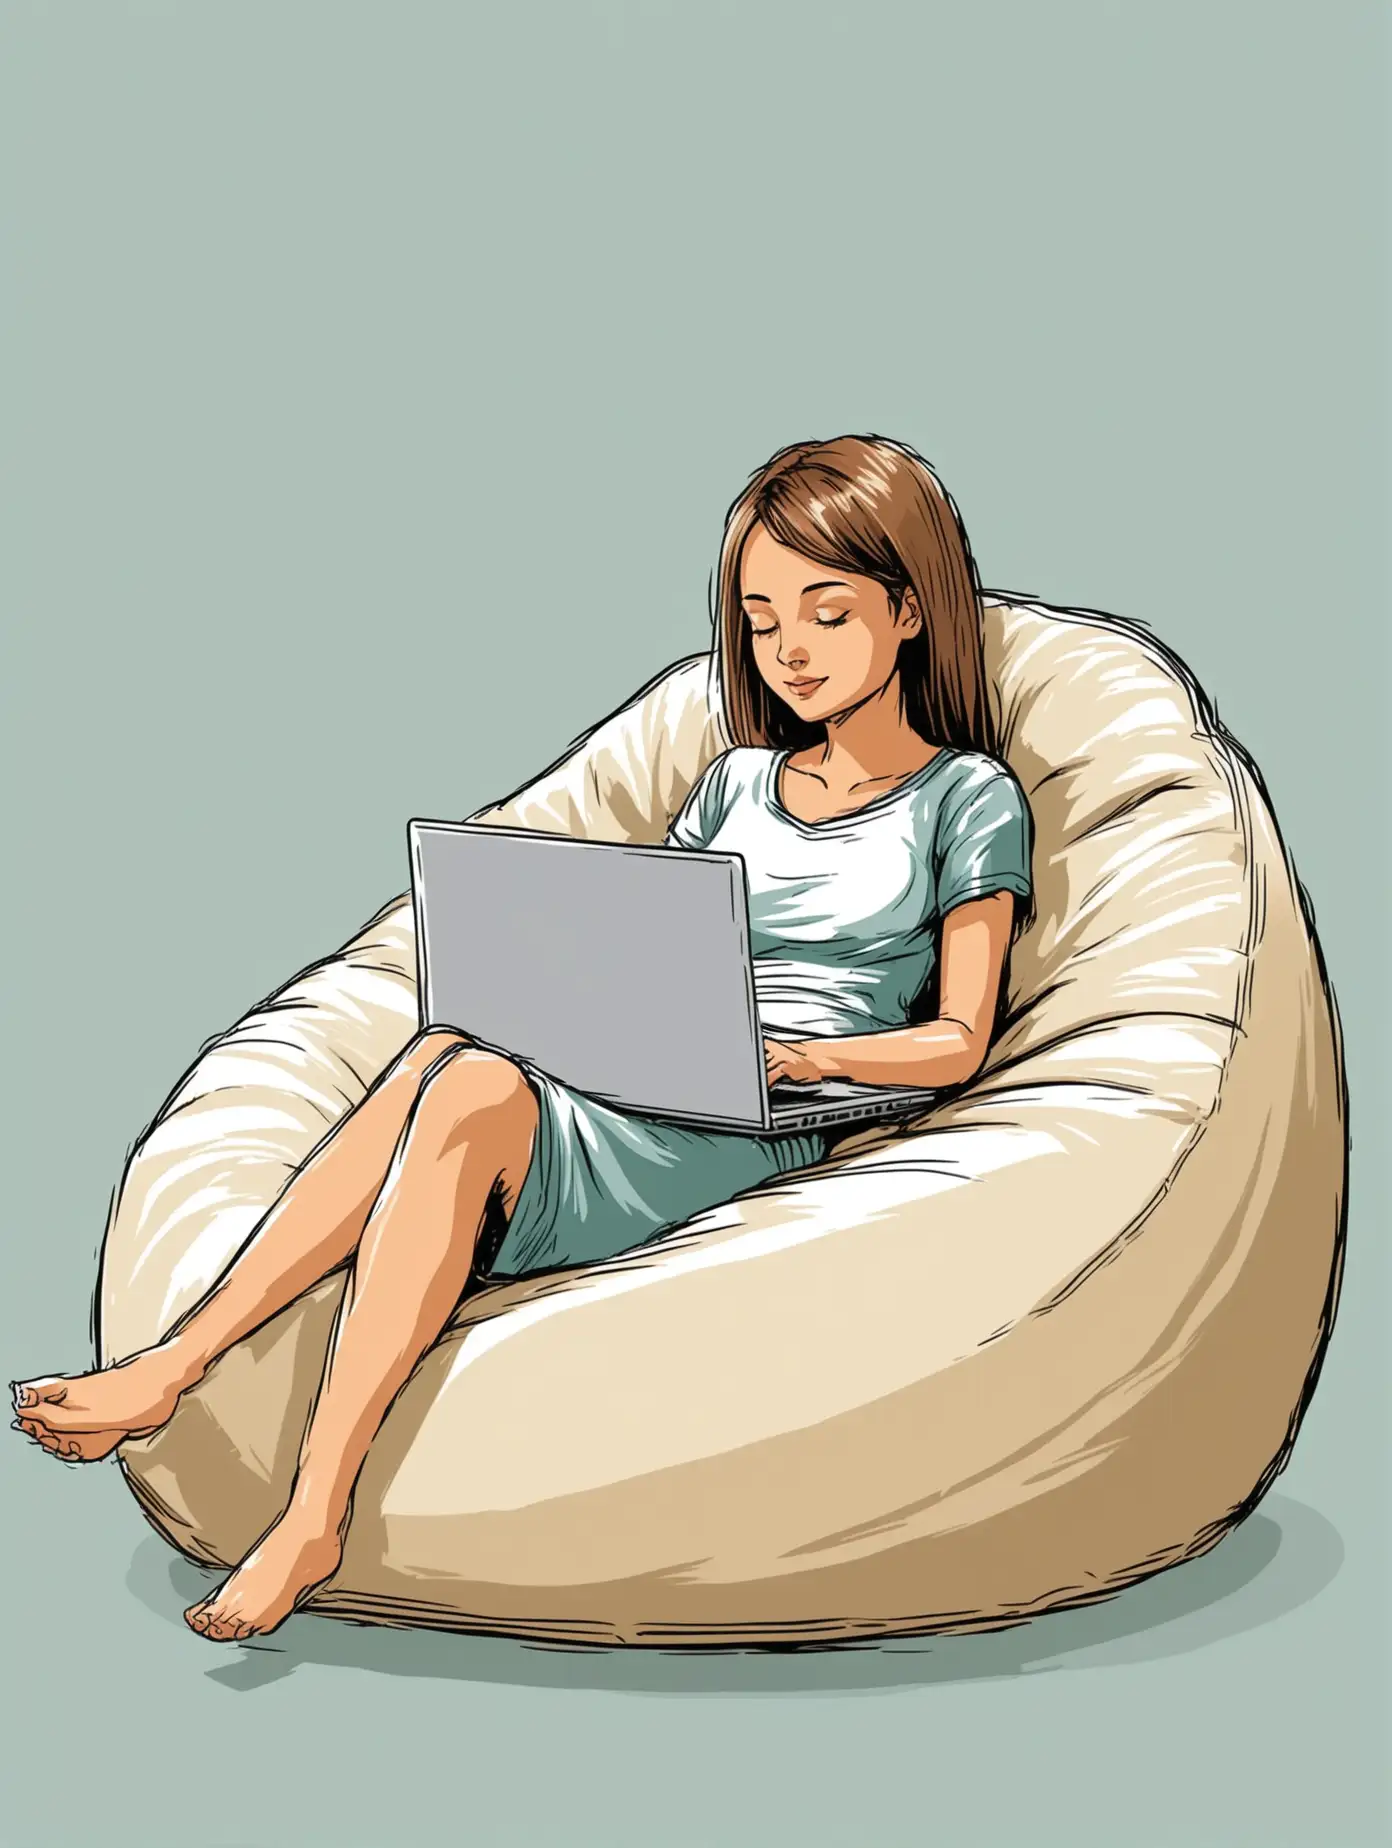 Young Woman Relaxing on Beanbag Chair with Laptop